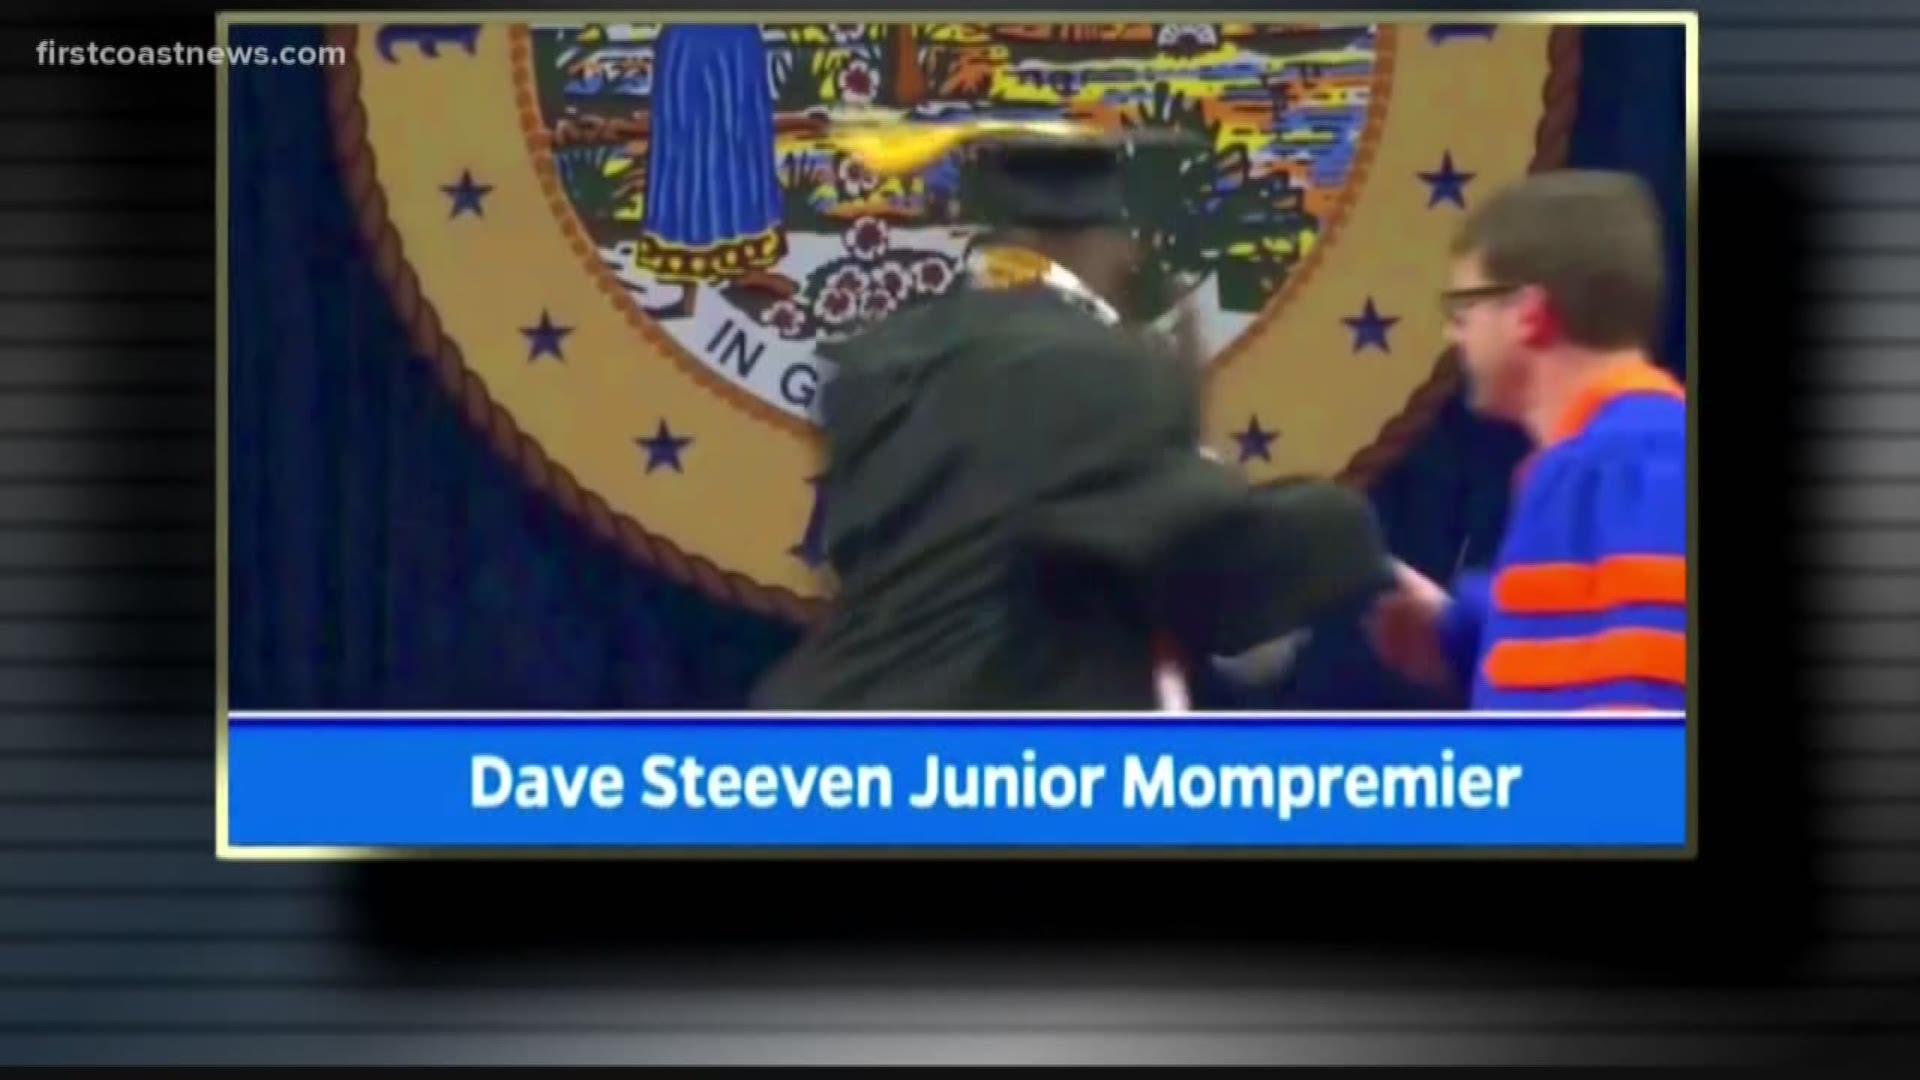 Videos popping up on social media showed an usher forcibly removing students from the stage after they received their diplomas during the university's commencement.